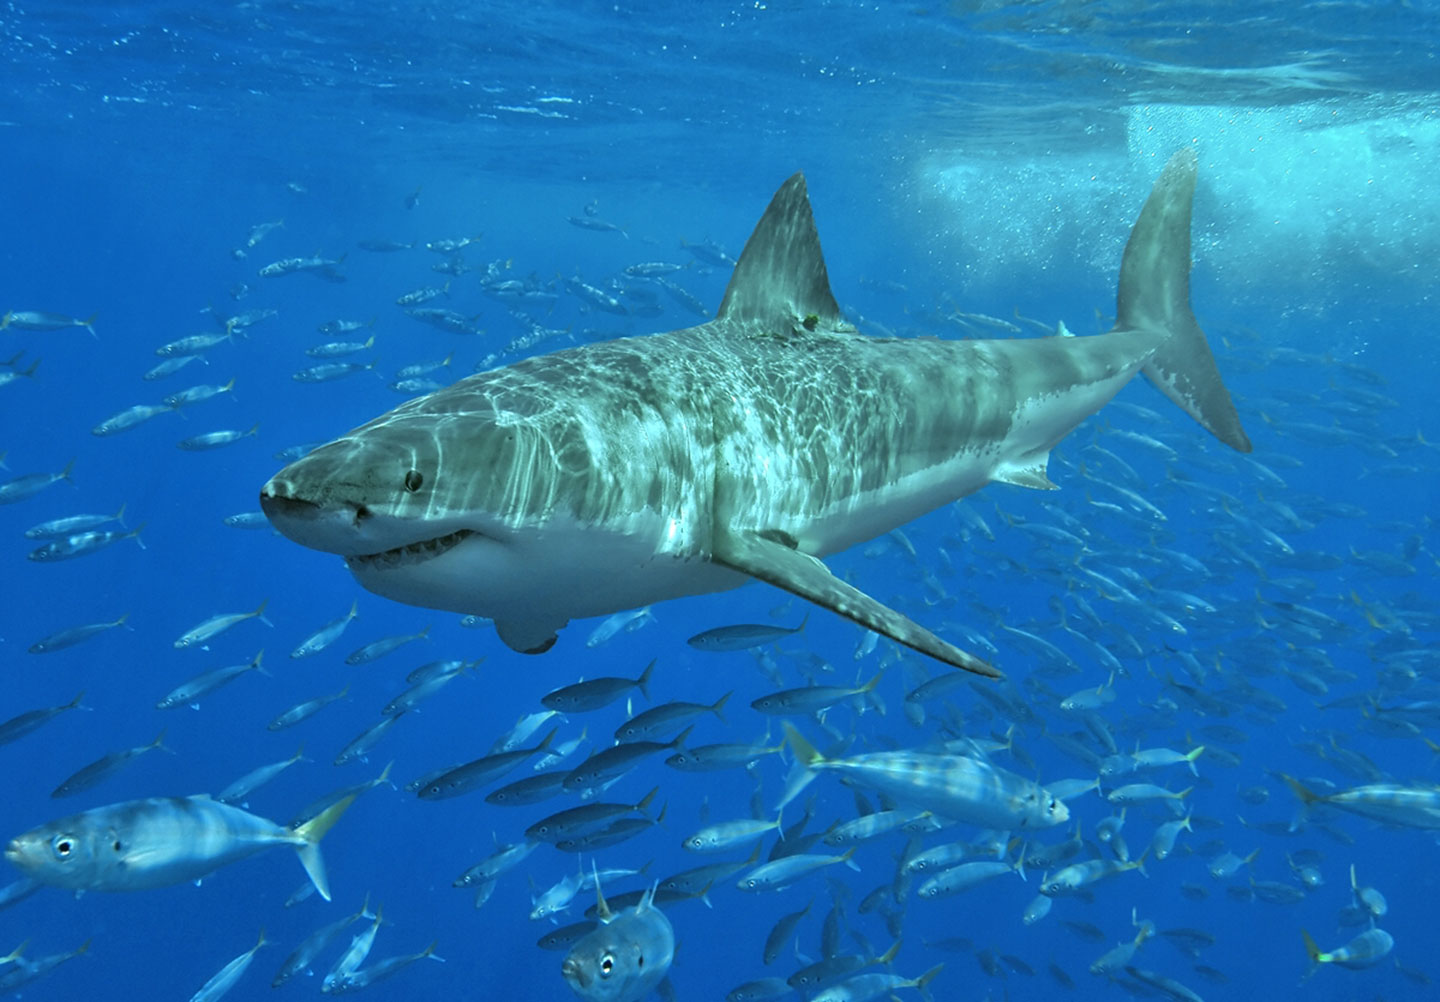 A great white shark surrounded by other fish